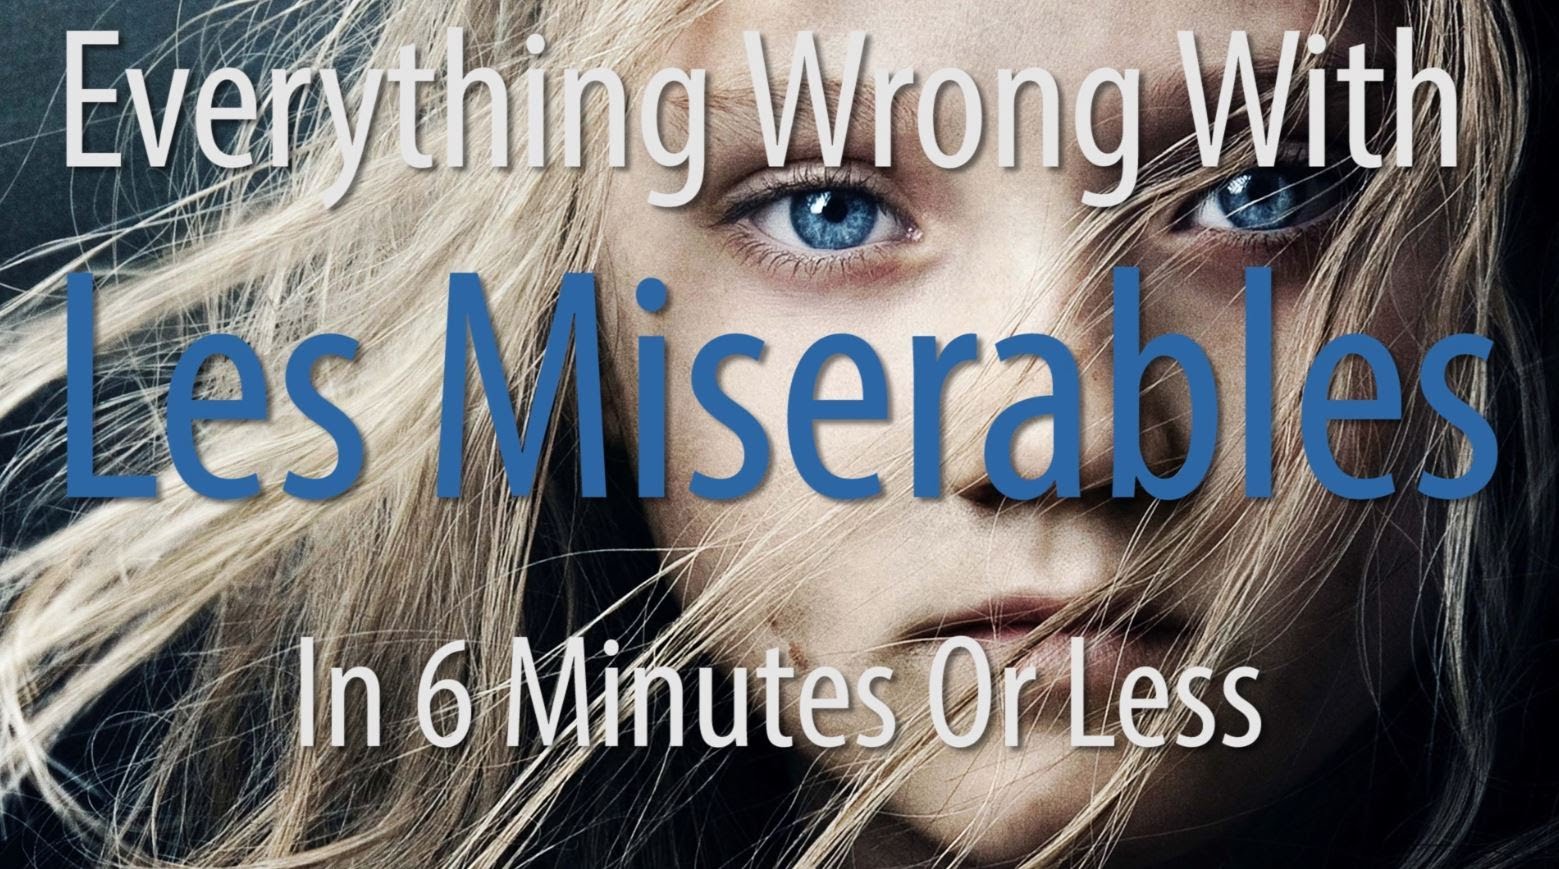 Everything wrong with Les Misérables